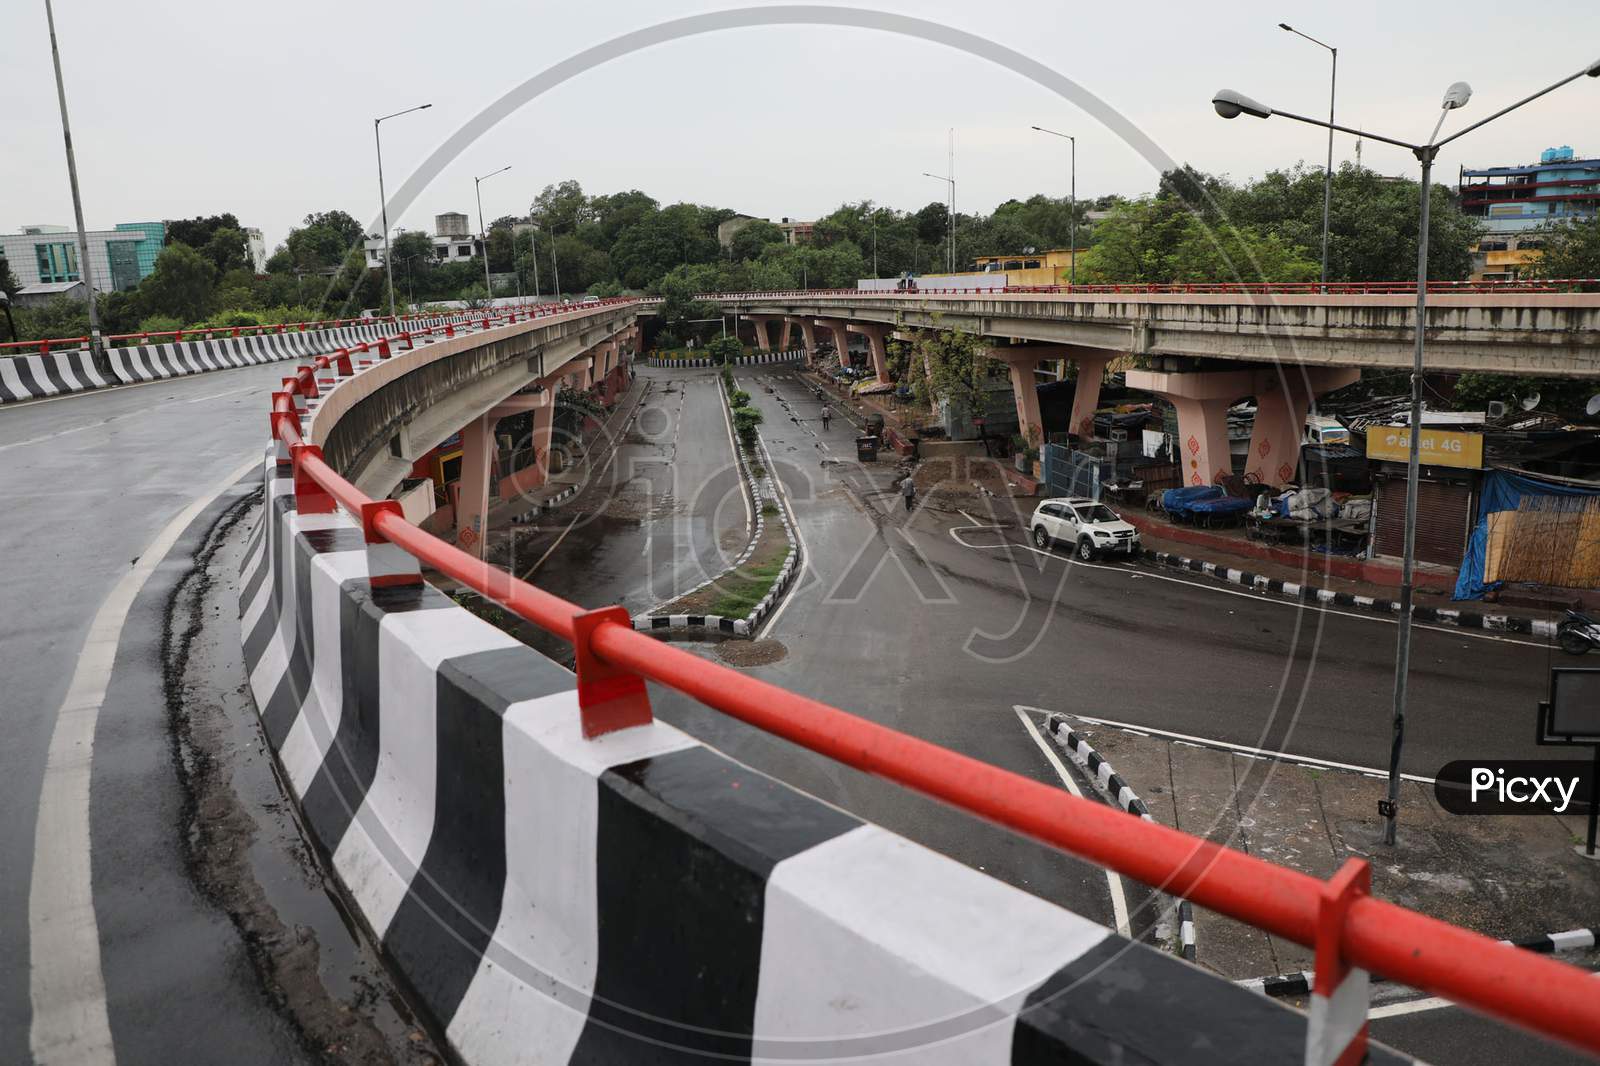 Deserted road is seen after the authorities announced complete lockdown on weekends and public holidays due to surge in COVID-19 cases, in Jammu, on August 1, 2020